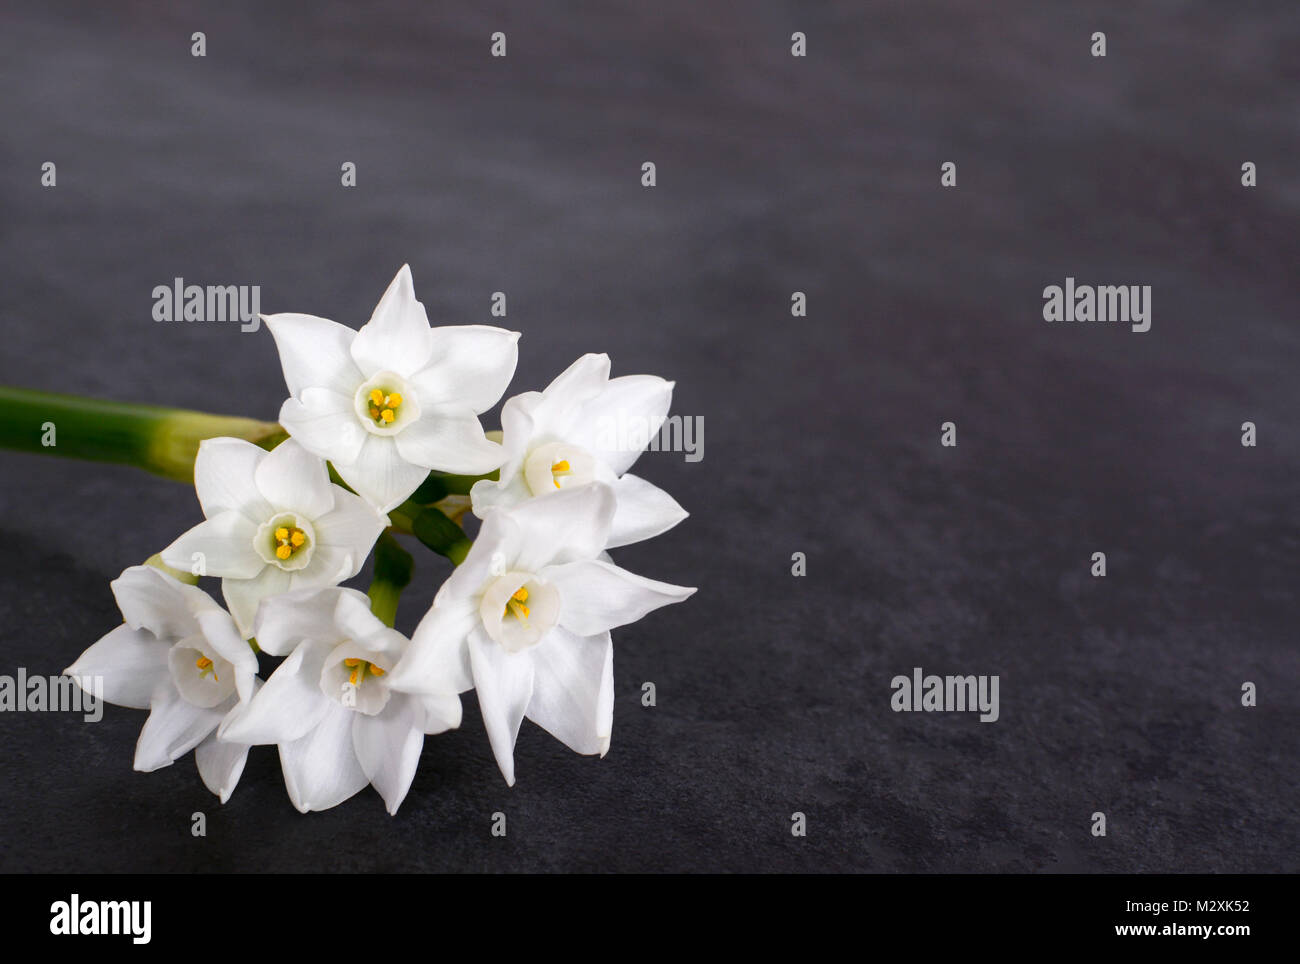 Stem of white narcissus with six flowers, on a dark grey background with copy space Stock Photo